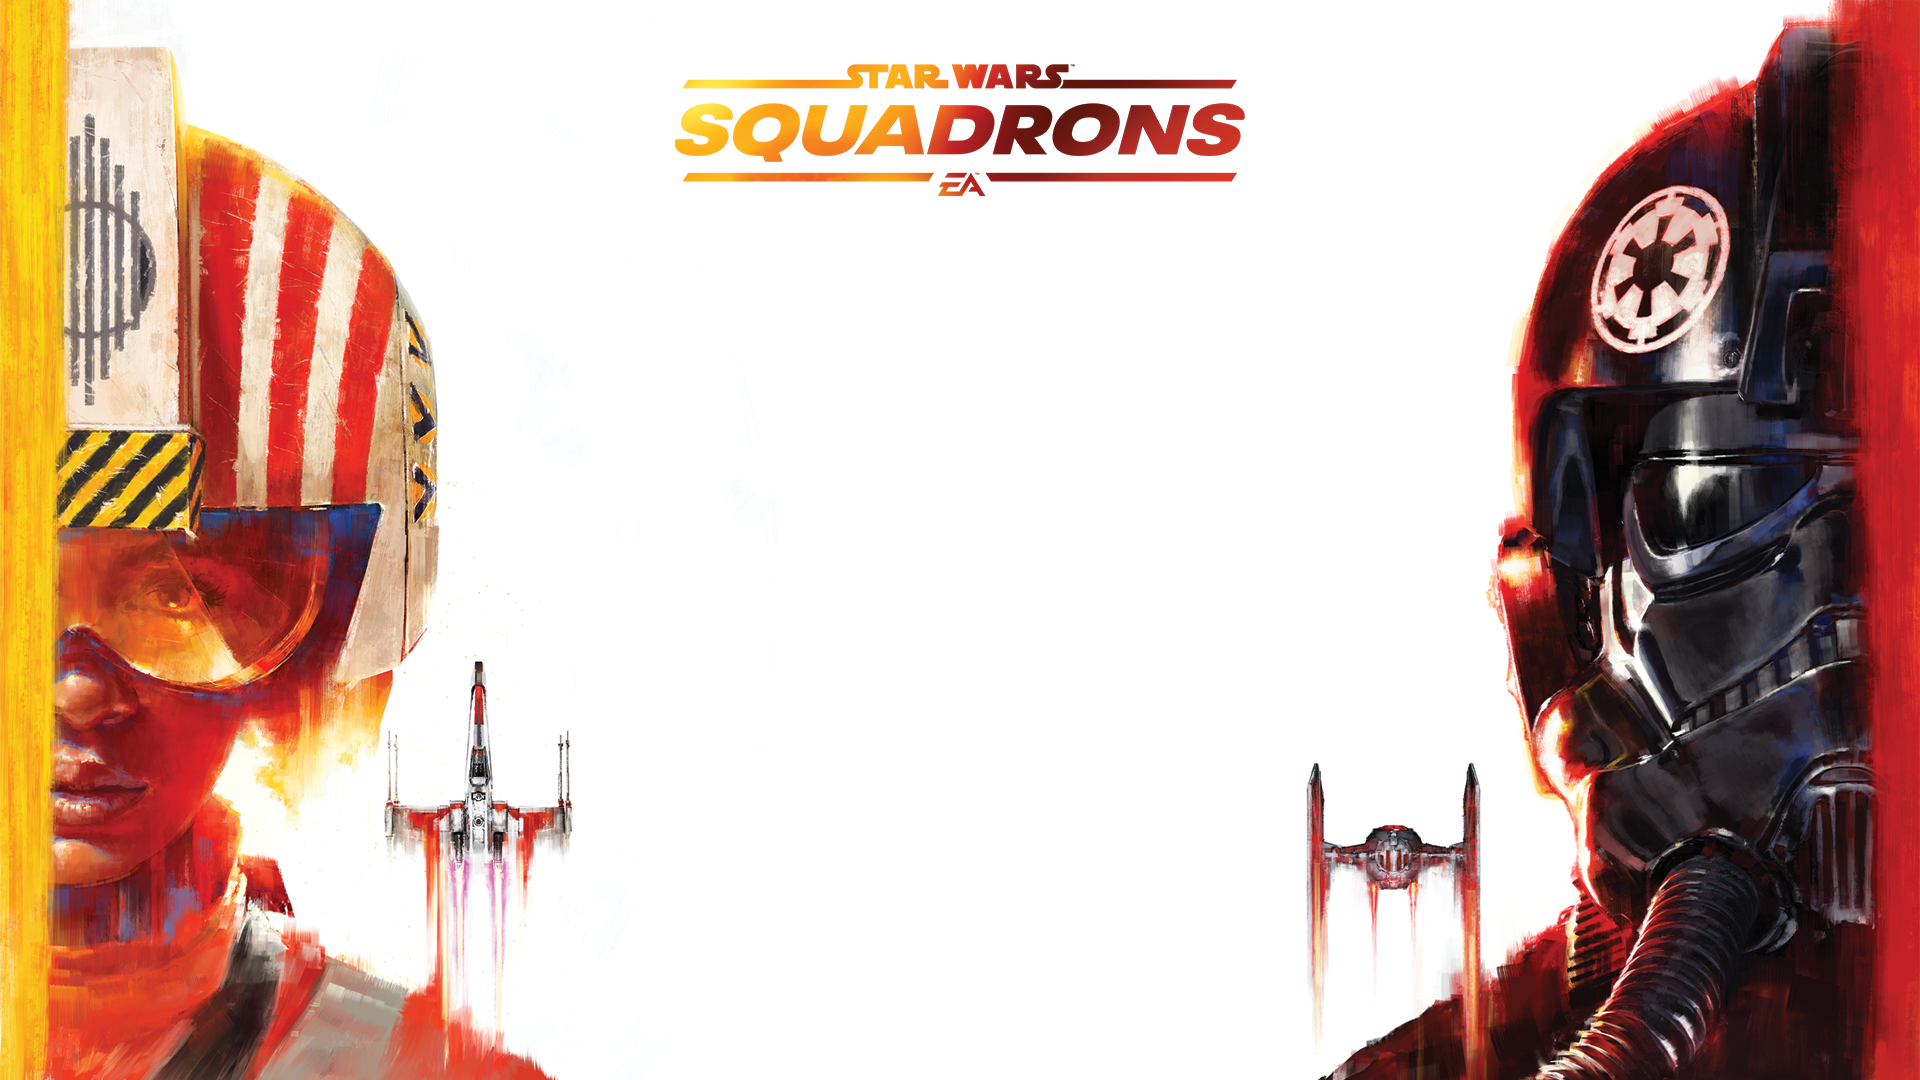 EA announces new content coming to Star Wars: Squadrons